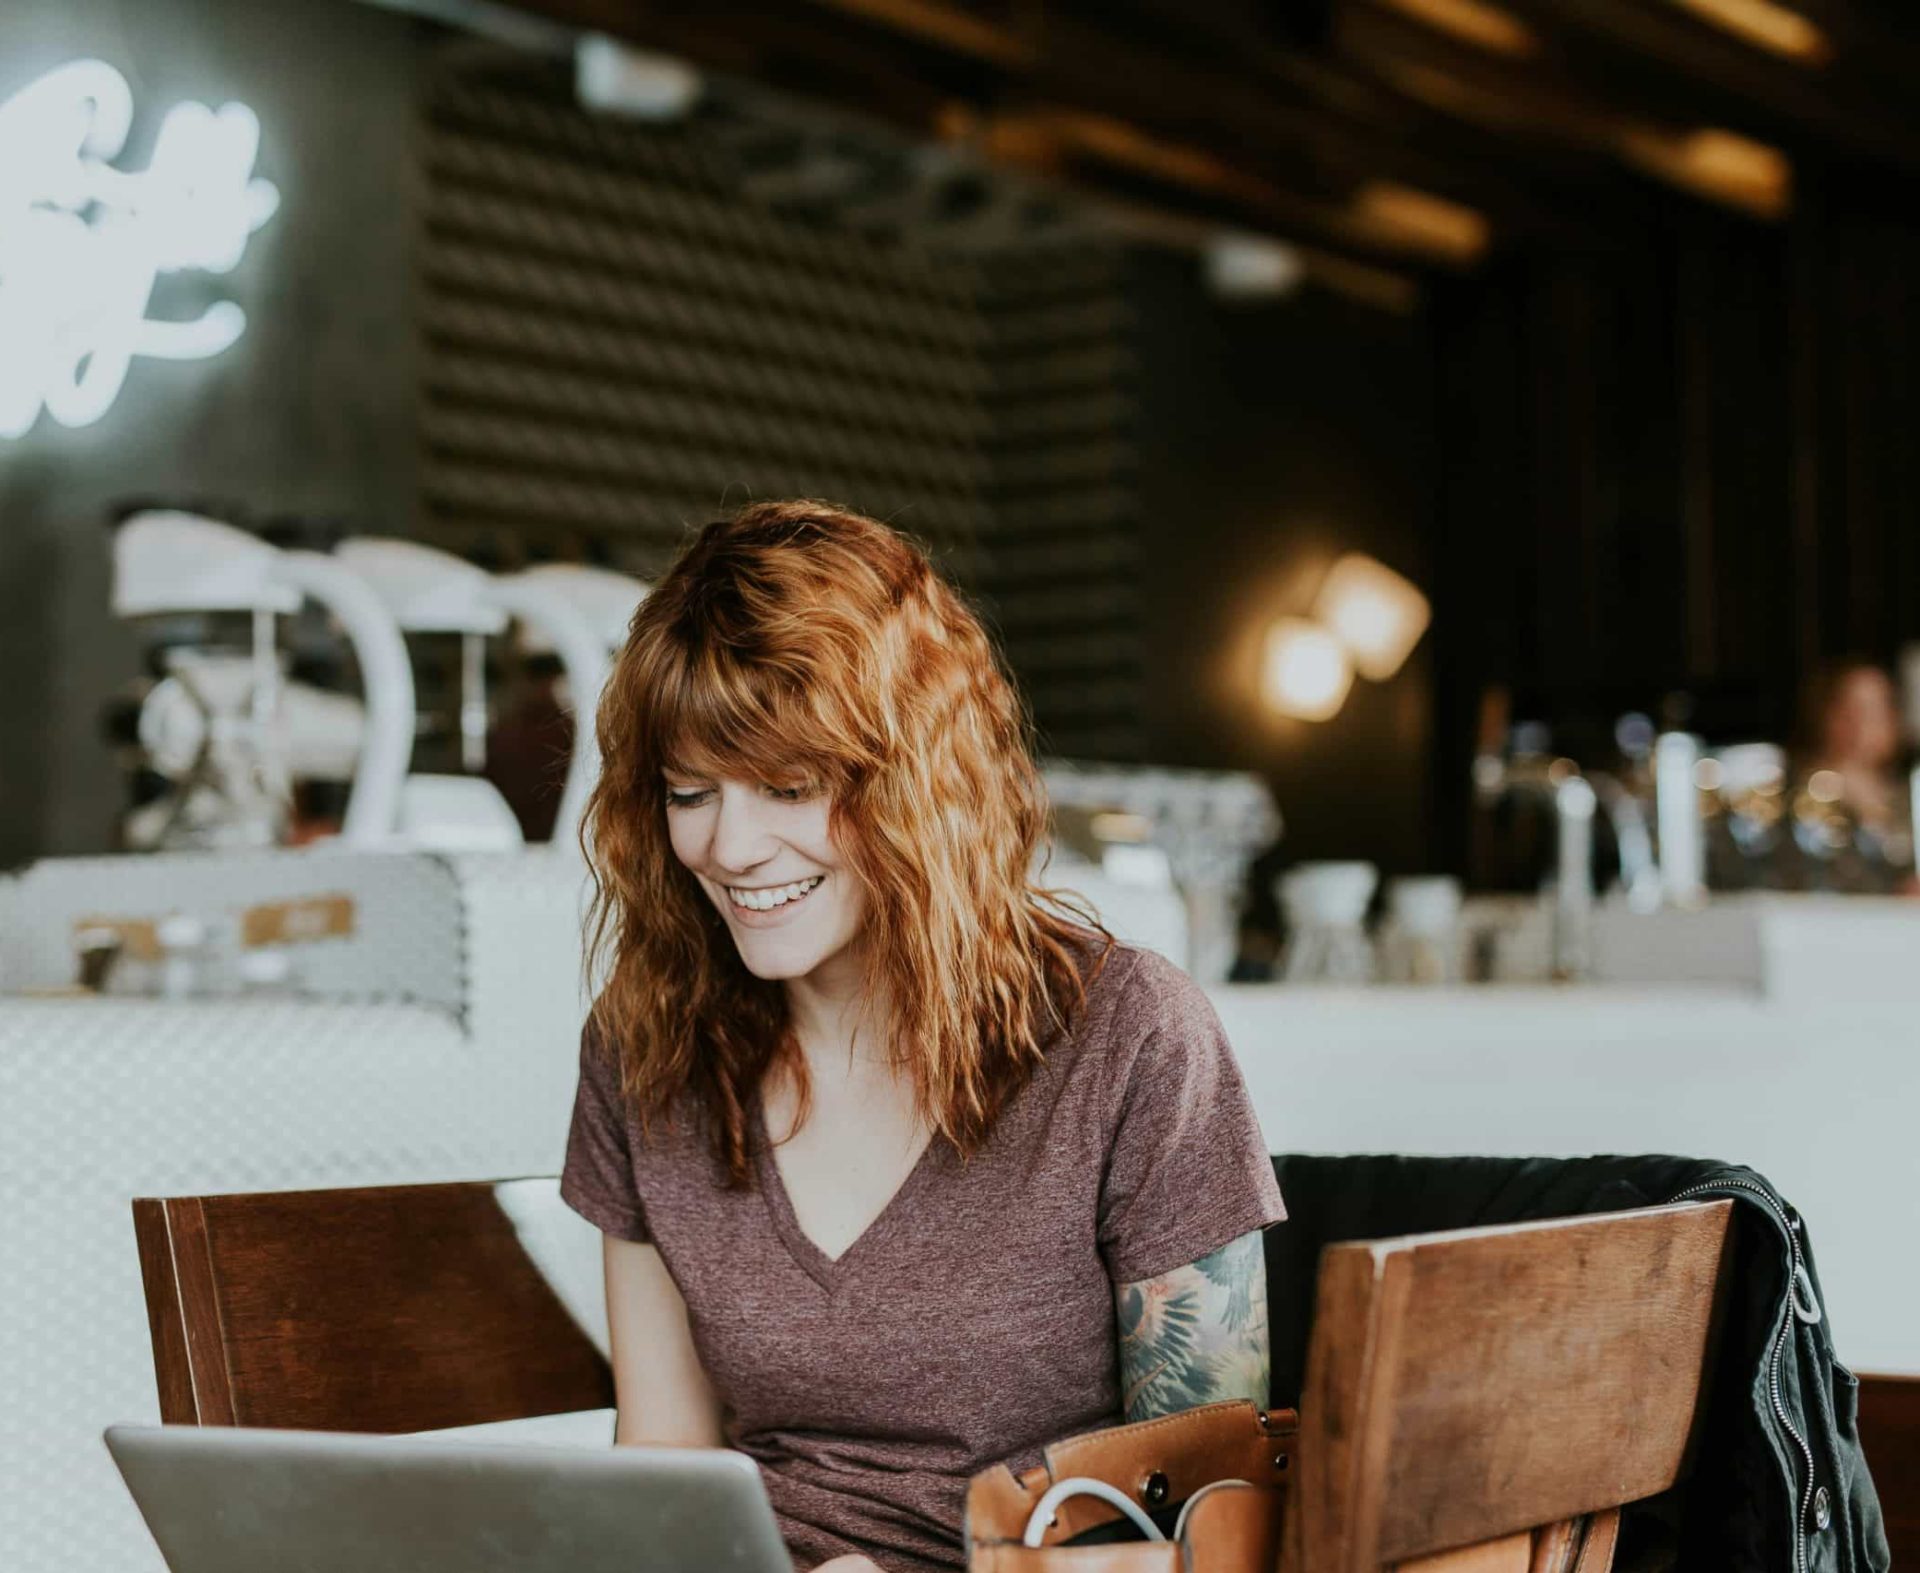 Ginger-haired woman smiles at her laptop screen while sat in a hipster coworking space. Presumably so overjoyed because she's just found out how amazing it is using Quuu for social media content suggestions using AI.